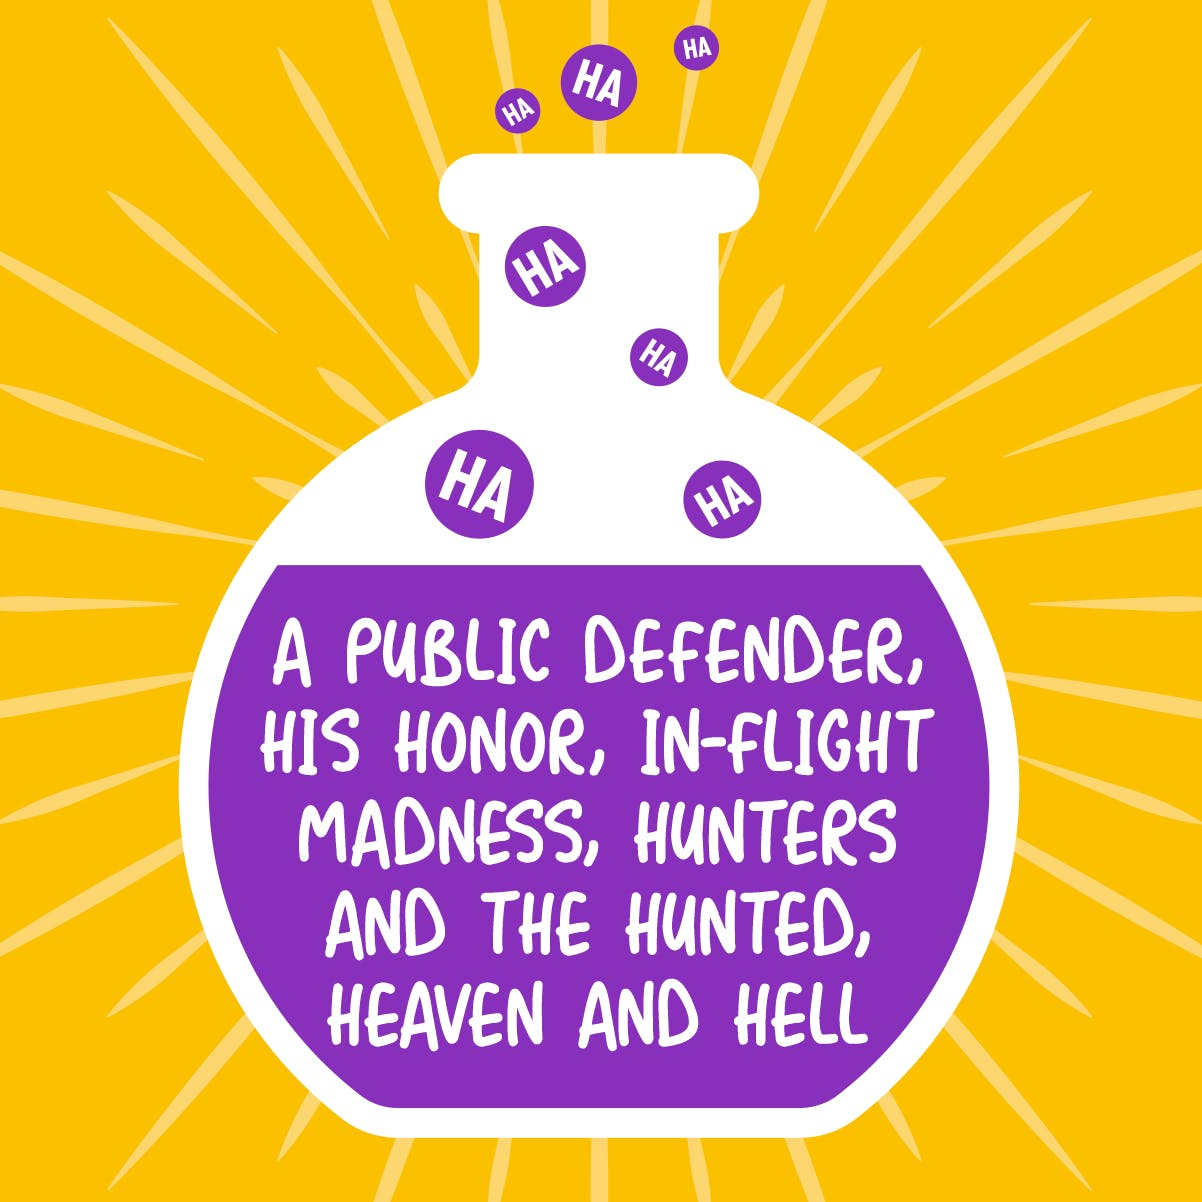 A Public Defender, His Honor, In-Flight Madness, Hunters and the Hunted, Heaven and Hell